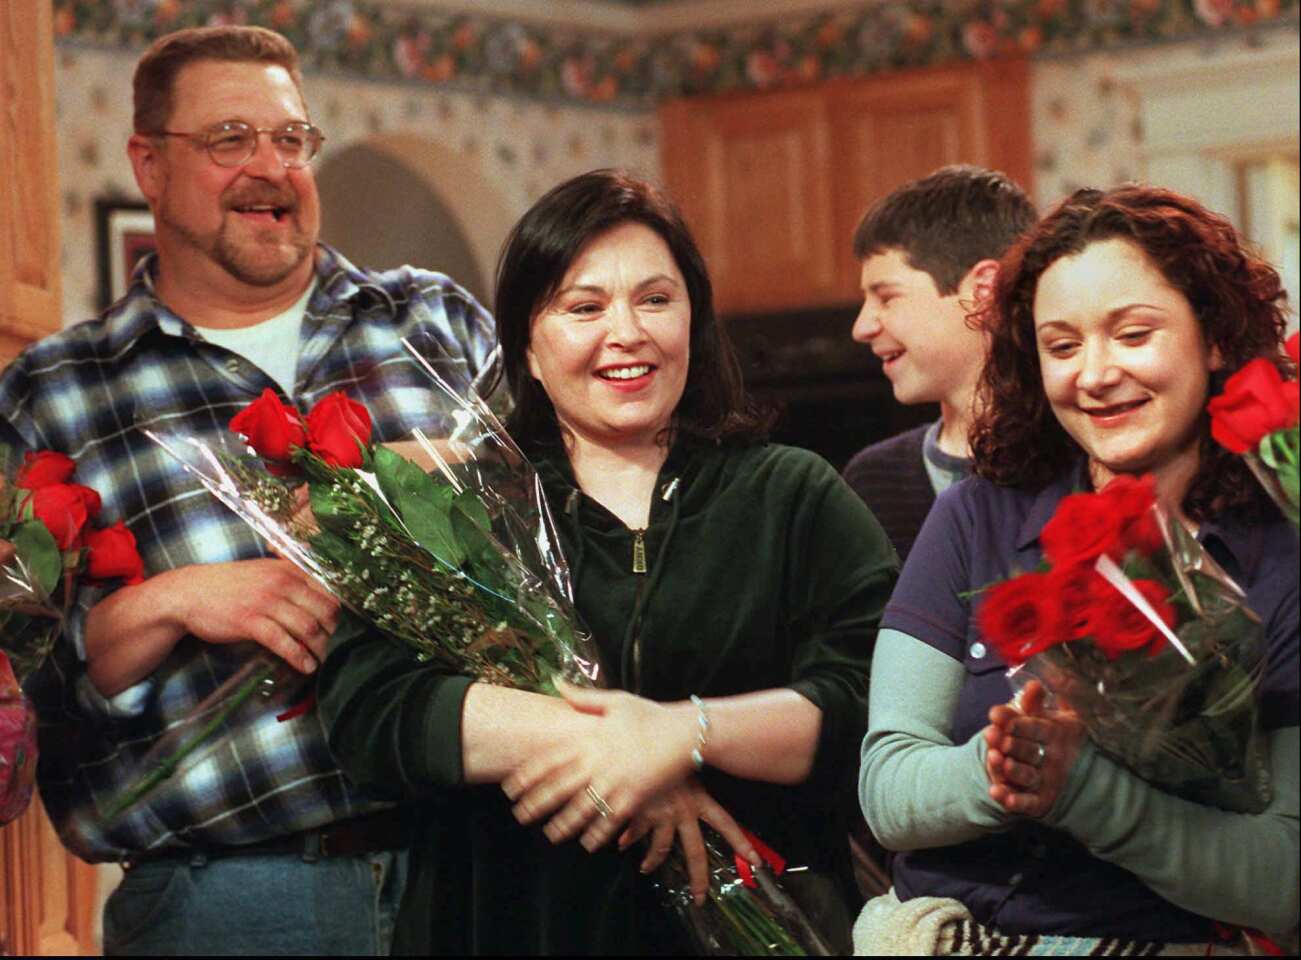 Frank and proudly blue collar, Roseanne (Roseanne Barr) and Dan Connor (John Goodman) try to keep a little order in the family and not be too hypocritical, since they were rebellious in their youth too.